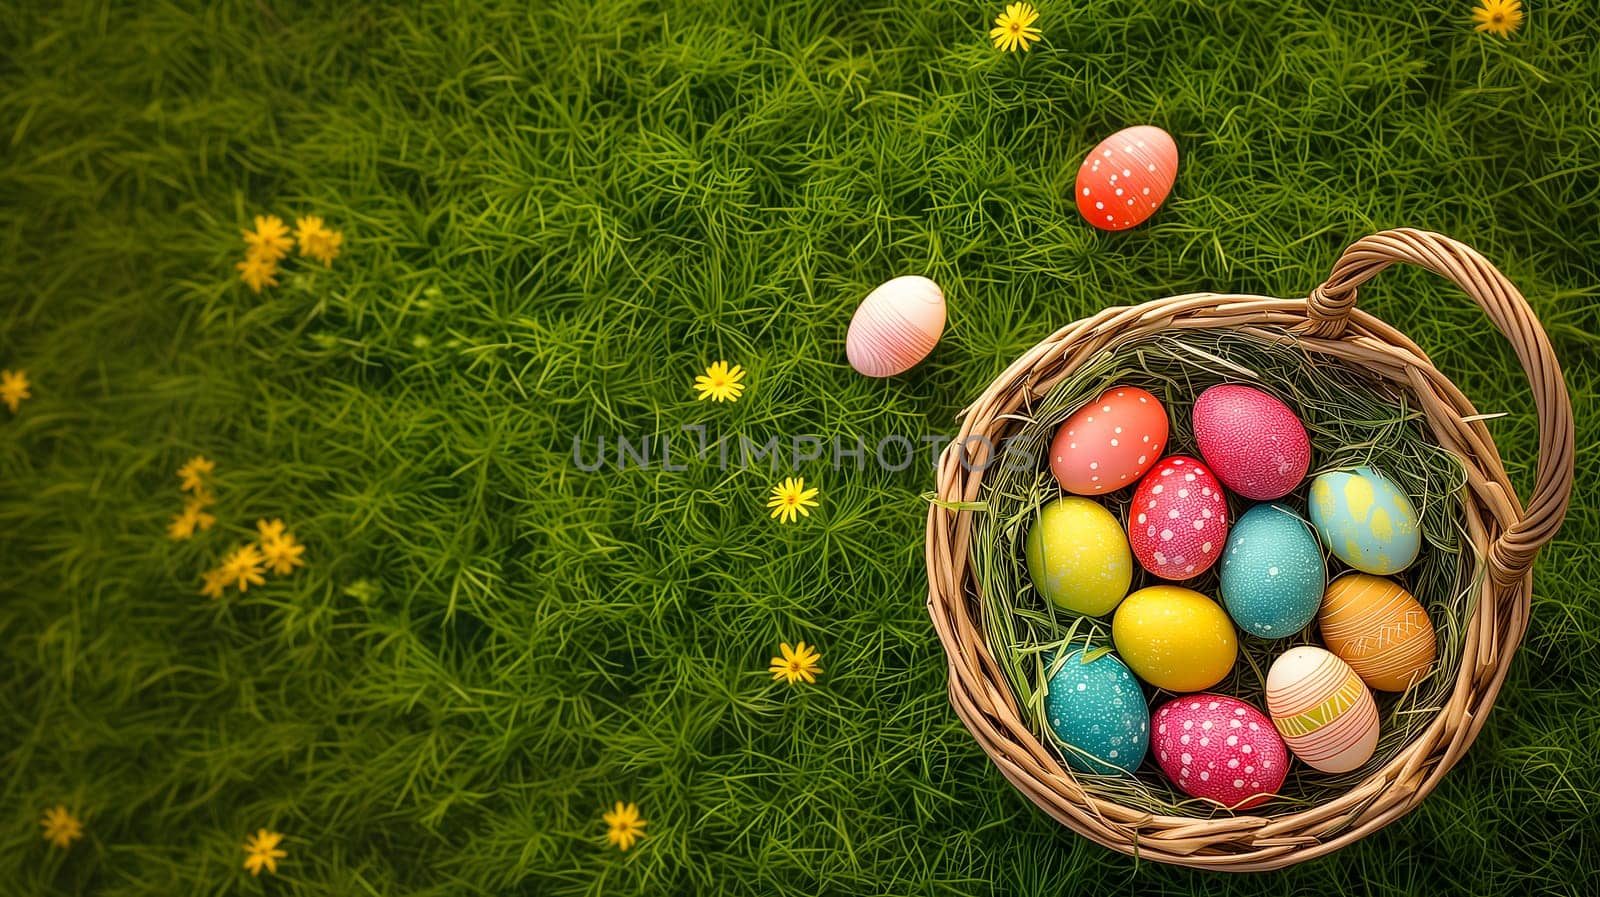 Easter basket with colorful eggs on a background of green grass meadow, high angle view by z1b